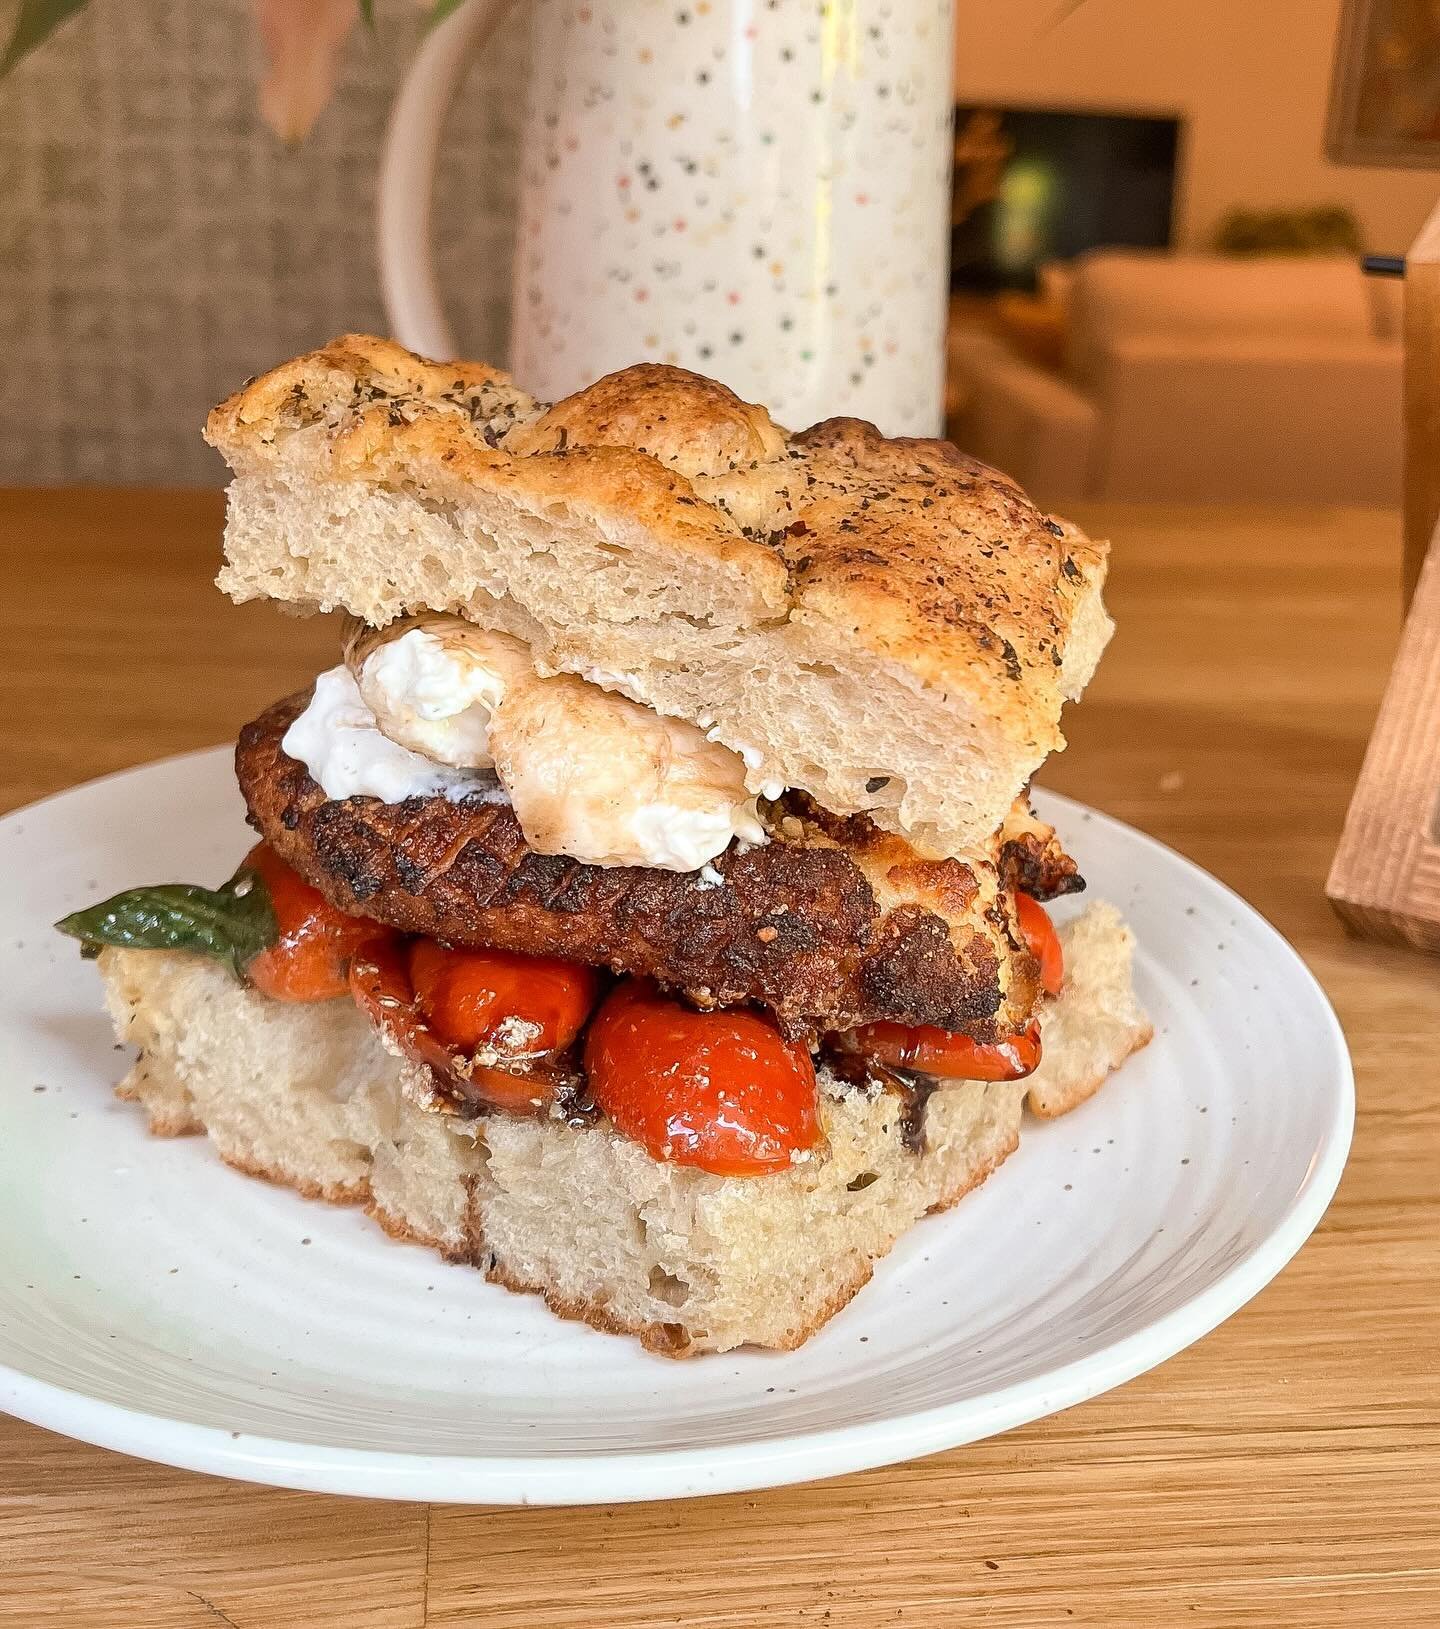 We&rsquo;ve said it once and we&rsquo;ll say it again! Our focaccia makes for the BEST sandwiches. 

Leftover chicken cutlet and caprese courtesy of @garbarinopgh